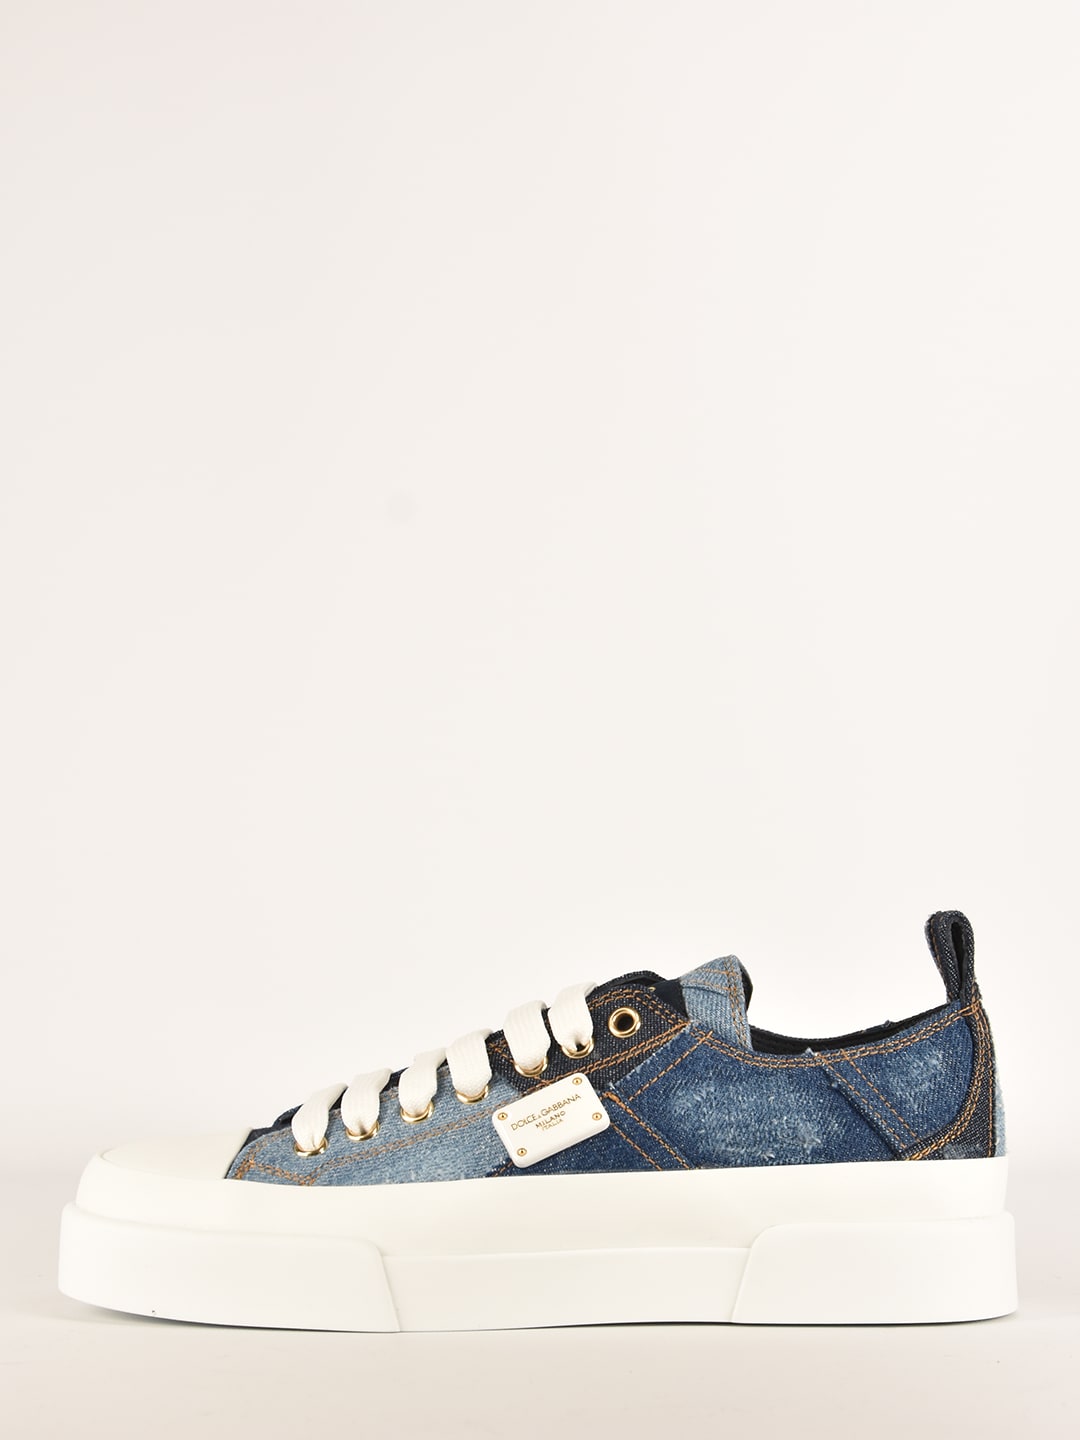 Buy Dolce & Gabbana Denim Patchwork Sneakers online, shop Dolce & Gabbana shoes with free shipping